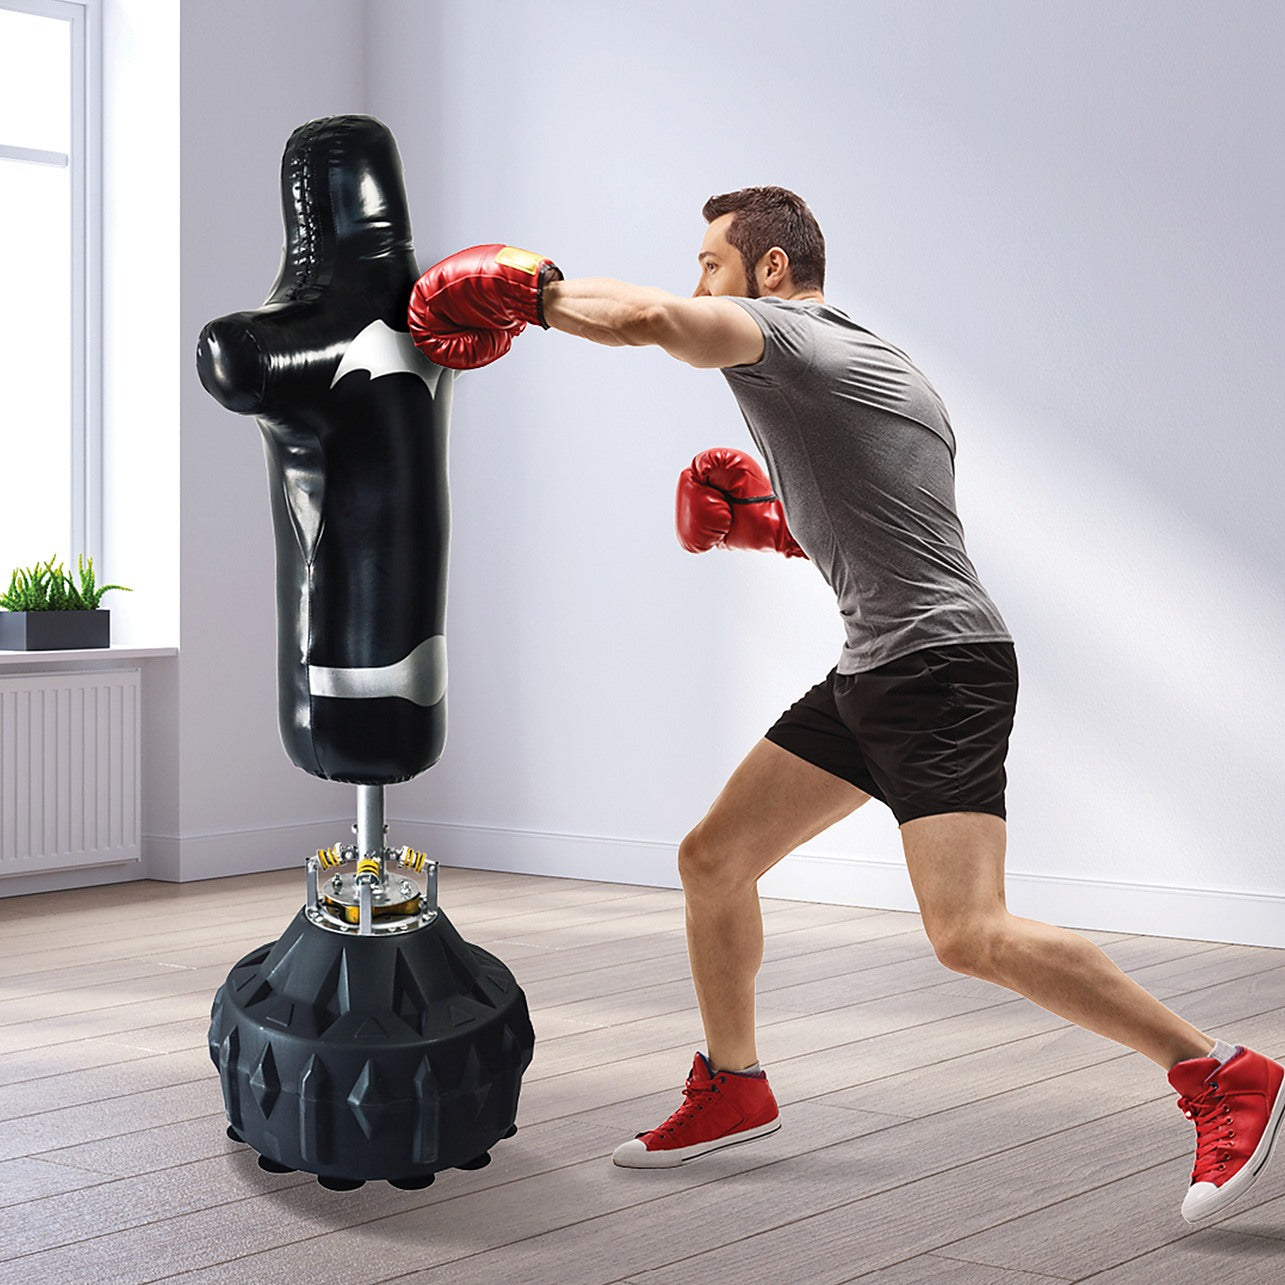 Top 10 Best Free Standing Heavy Bags - A Fighter's Guide 2023